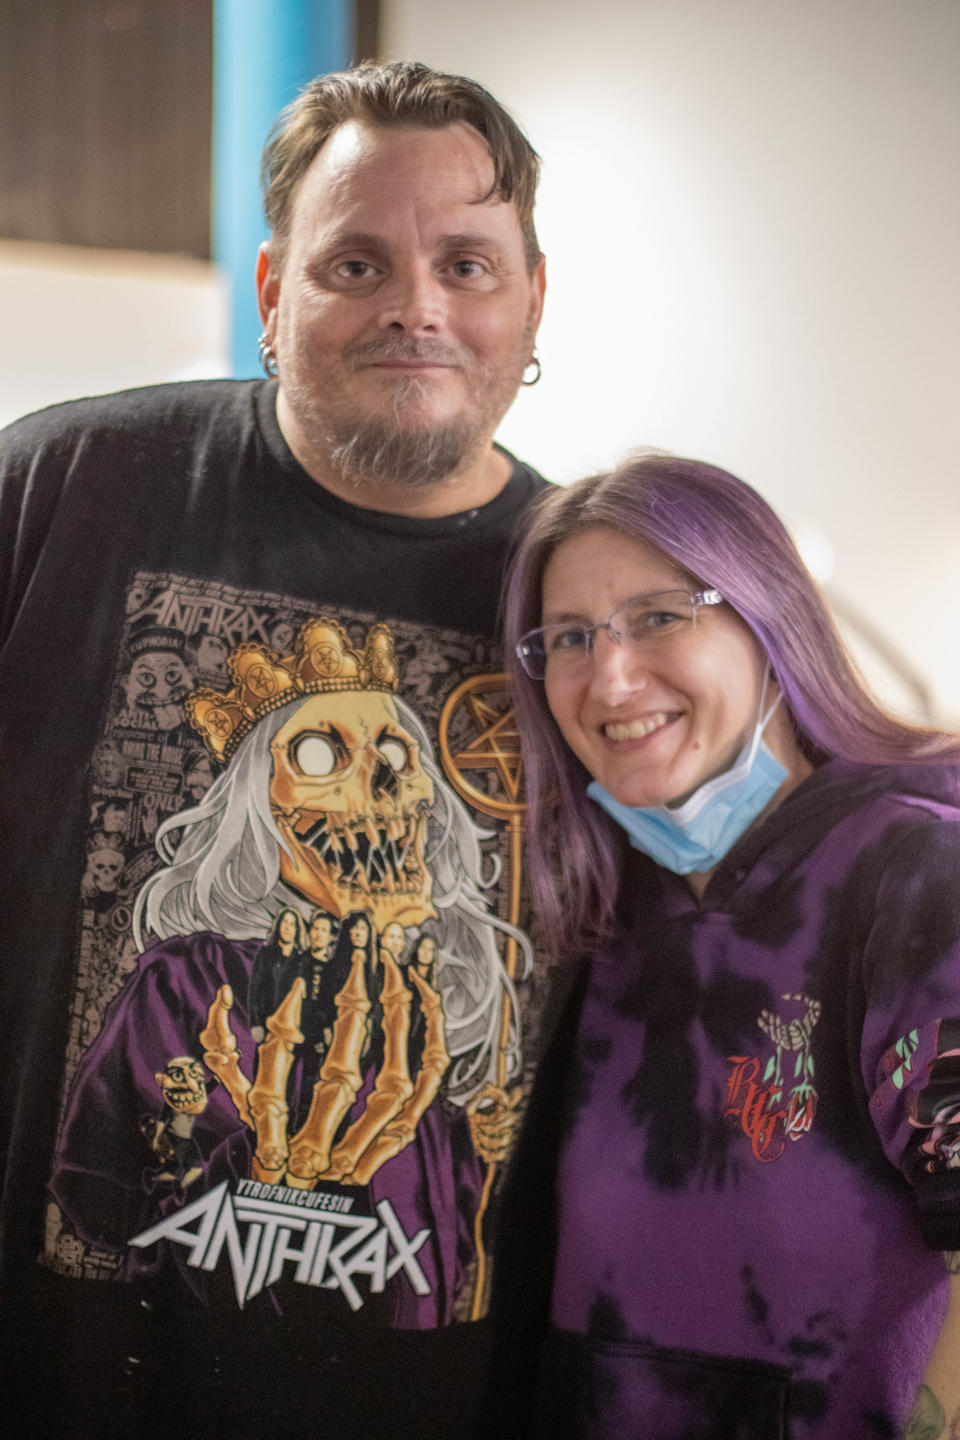 Sean McGill and Carrie McGill, pose for a photo at DragonsBane Tattoo & Body Piercing, 432 Columbia Street, Tuesday, Dec. 28, 2021, in Lafayette.